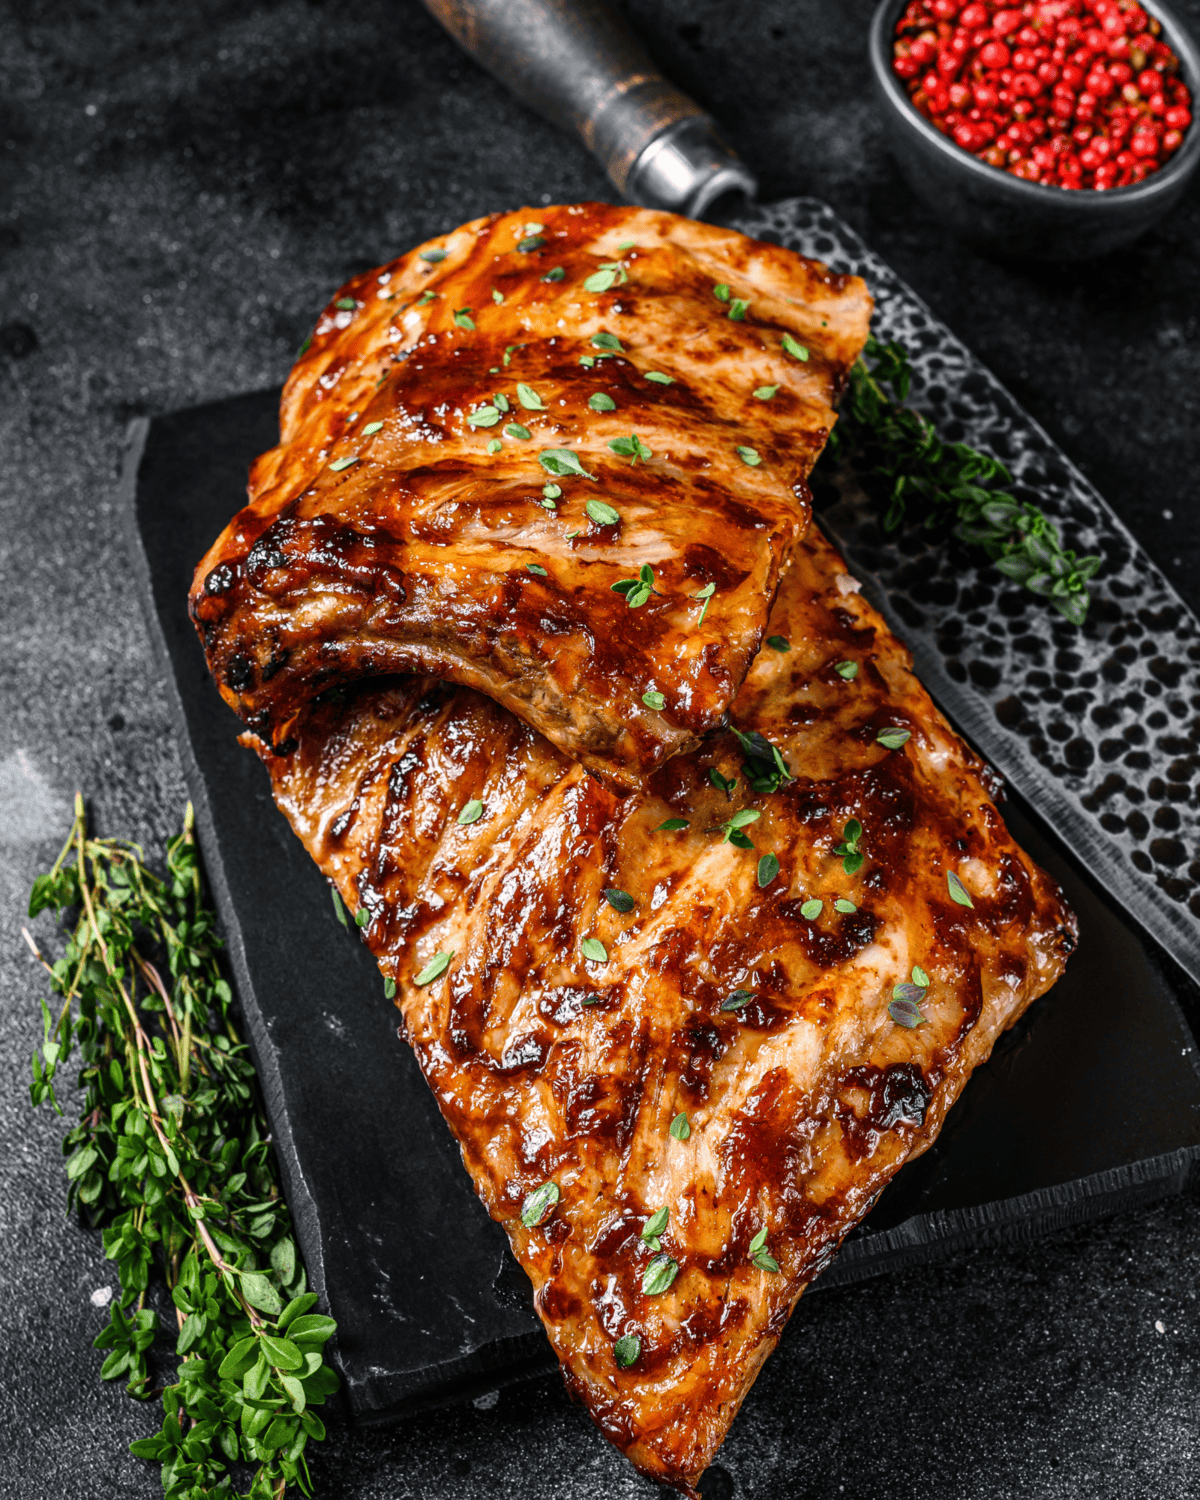 halved baked pork ribs grilled on the stovetop and served with herbs on top.